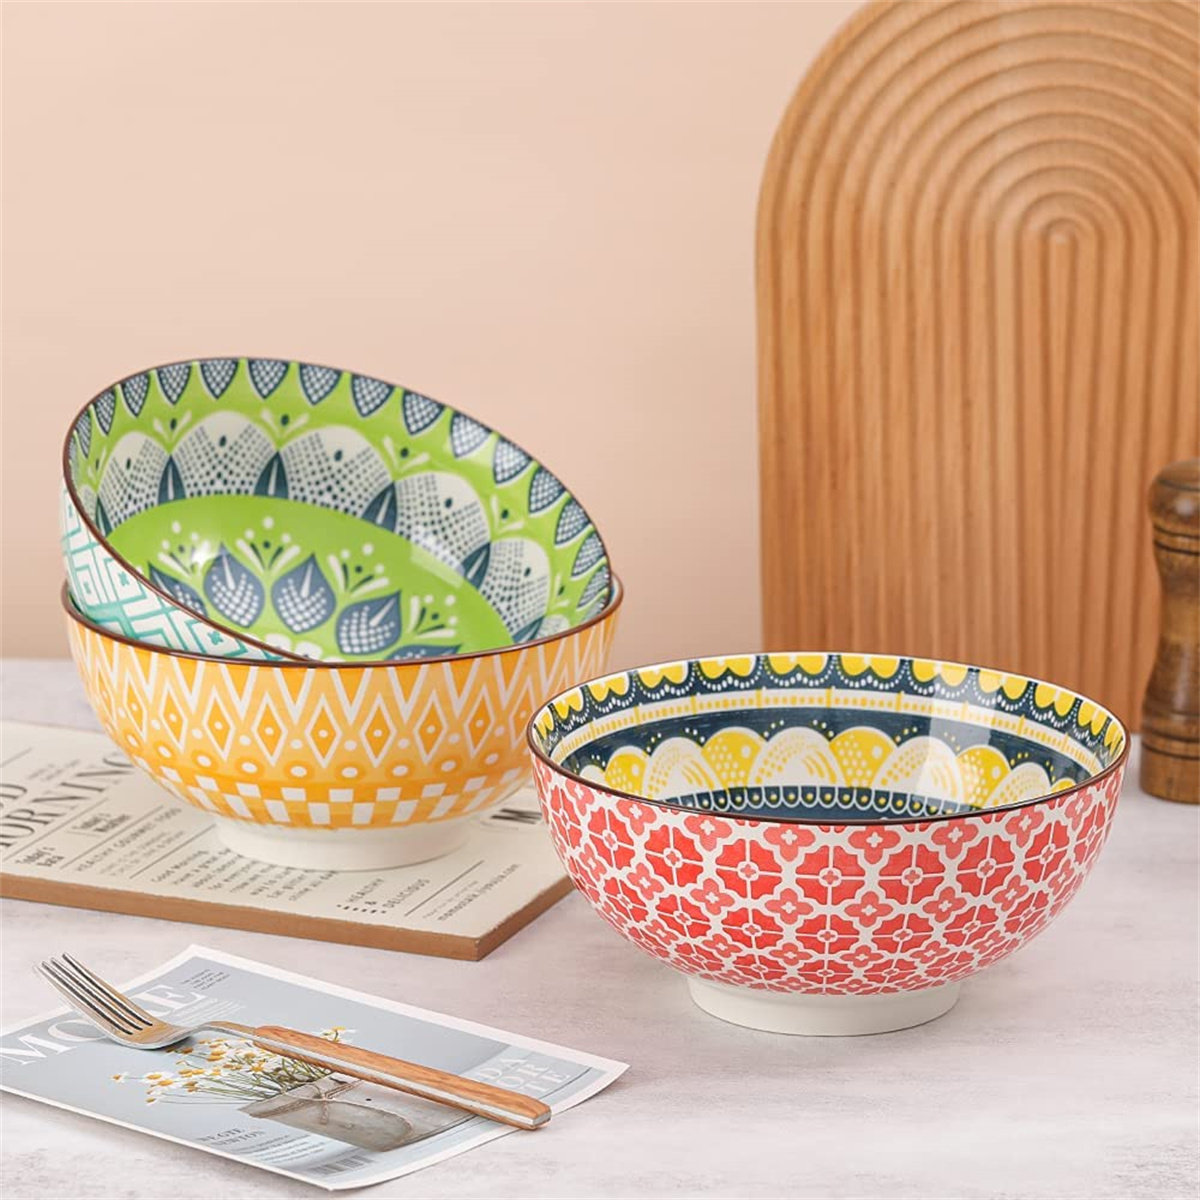 2 Pieces Ceramic Soup Bowls with Handles 30 oz Microwave Safe Bowl with Lid  Microwavable Soup Mug with Lid Large Soup Cups for Ramen Noodle Cereal